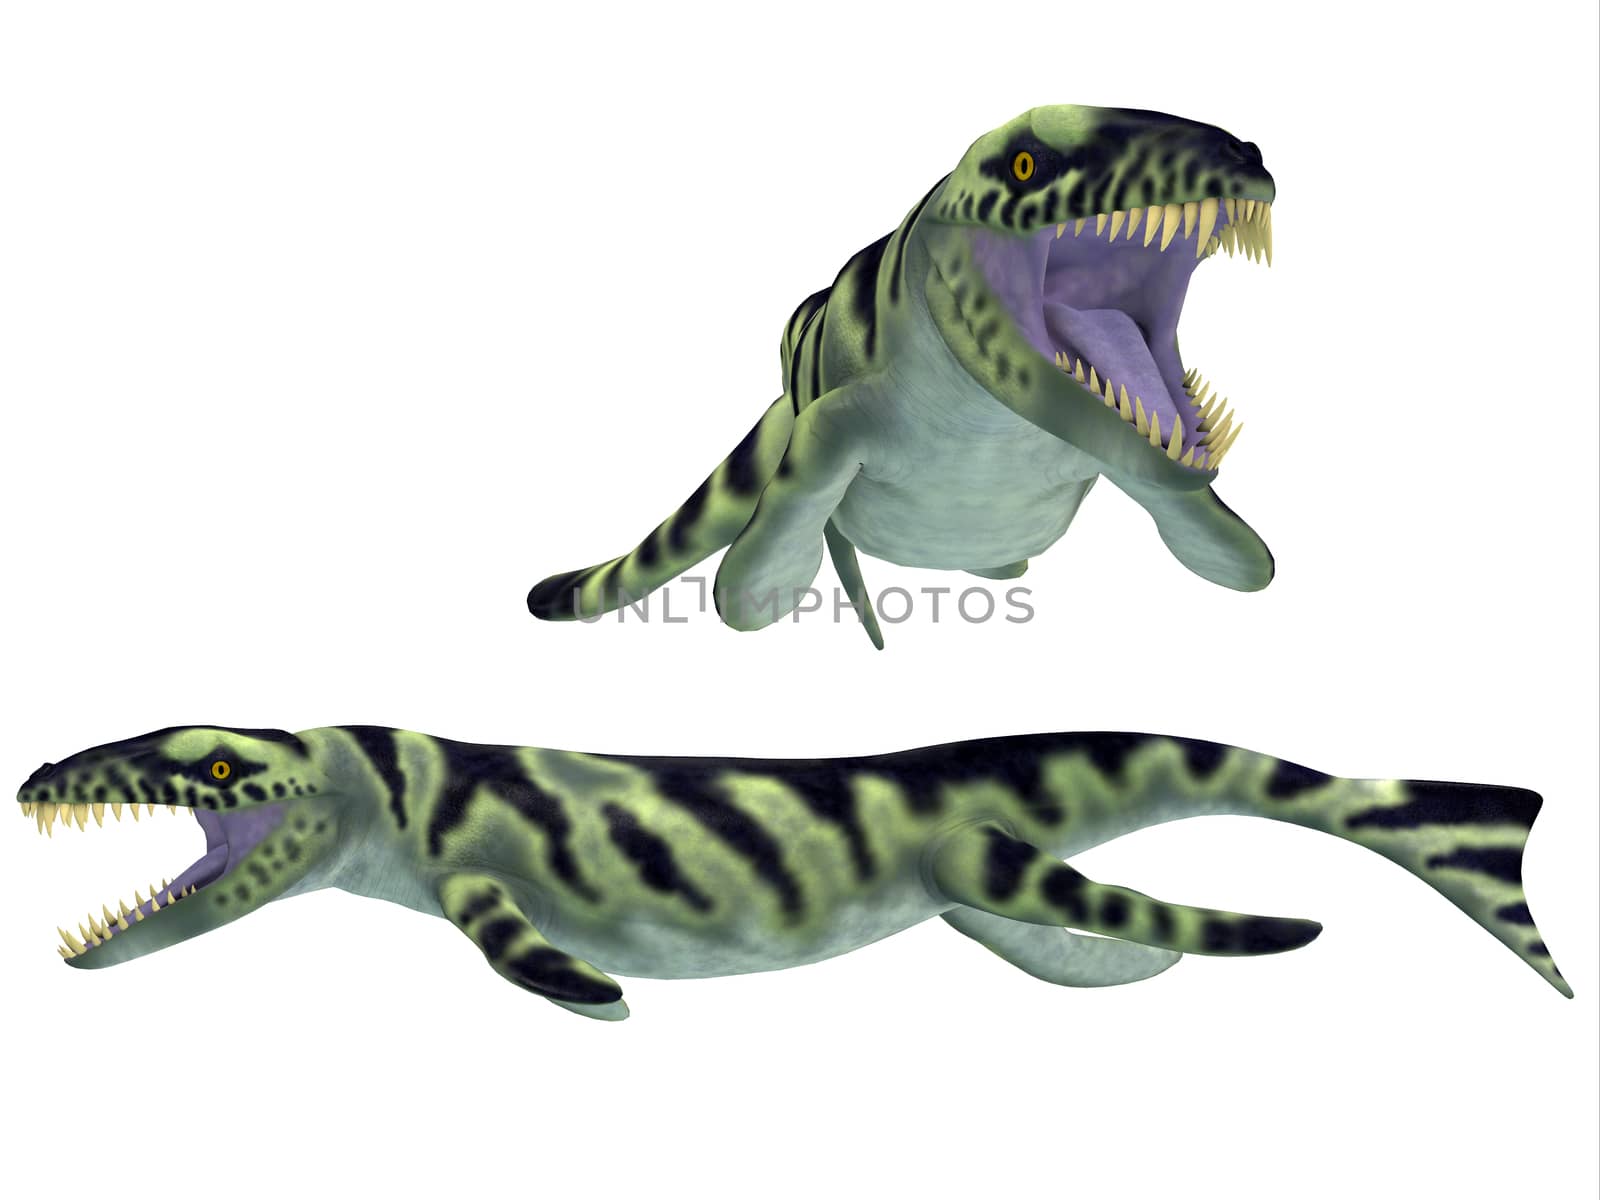 Dakosaurus was discovered in Argentina. It is unique among the family of marine crocodylians with its short snout (which is why it was nicknamed "Godzilla"). It lived during the Late Jurassic - Early Cretaceous.